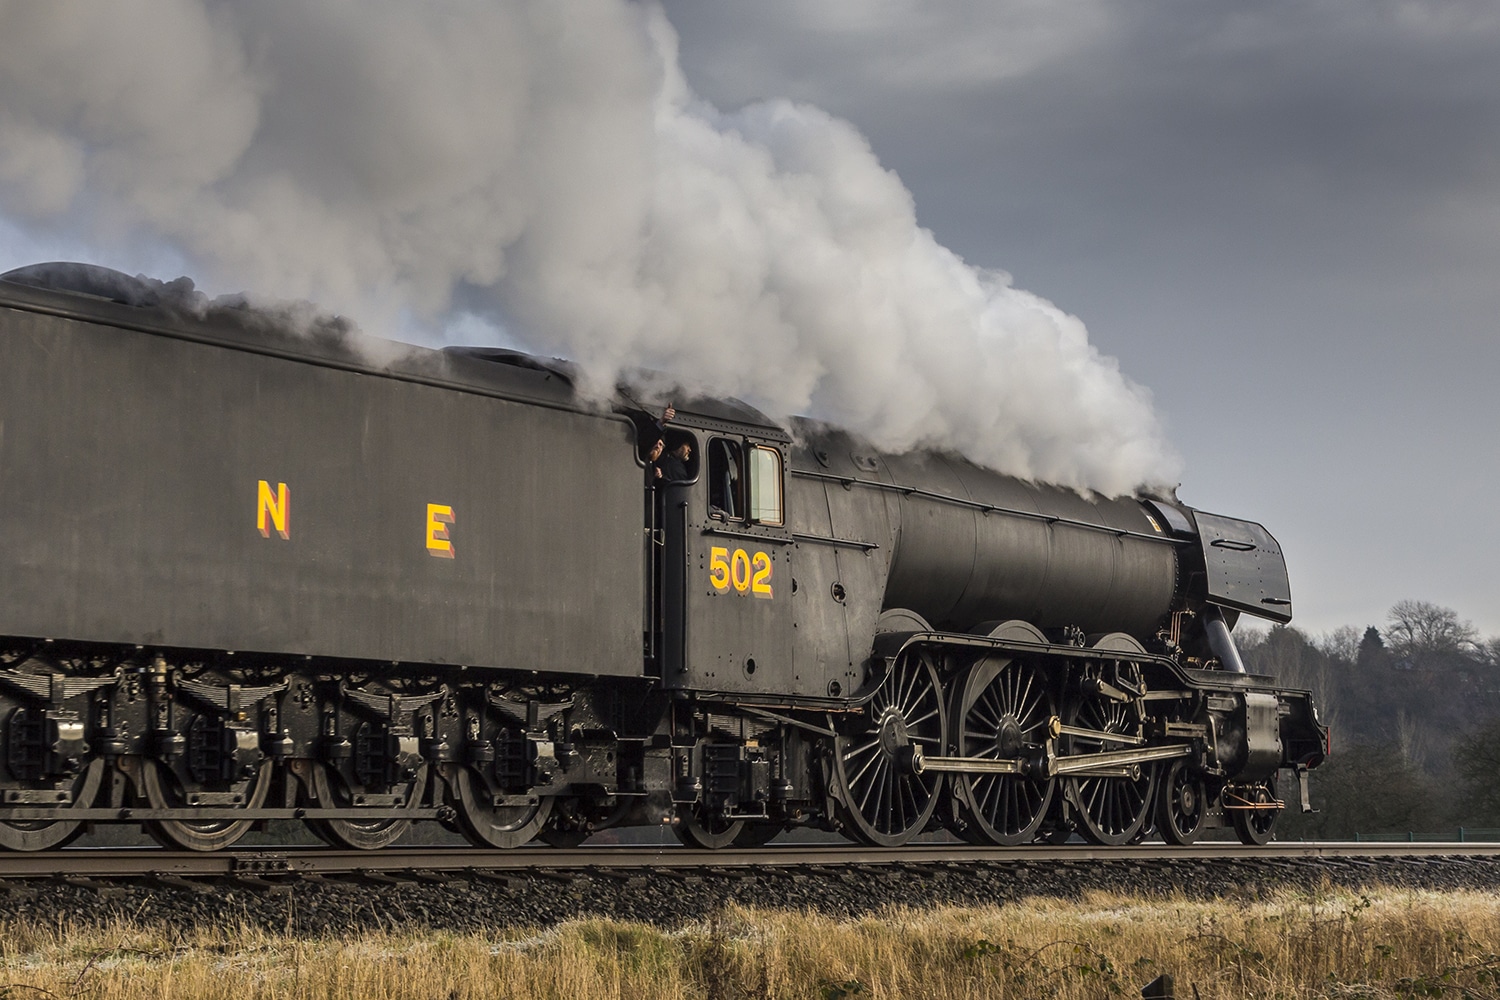 Flying Scotsman In Detail | Steam Engine Photography Landscapes Photography Colour Photo